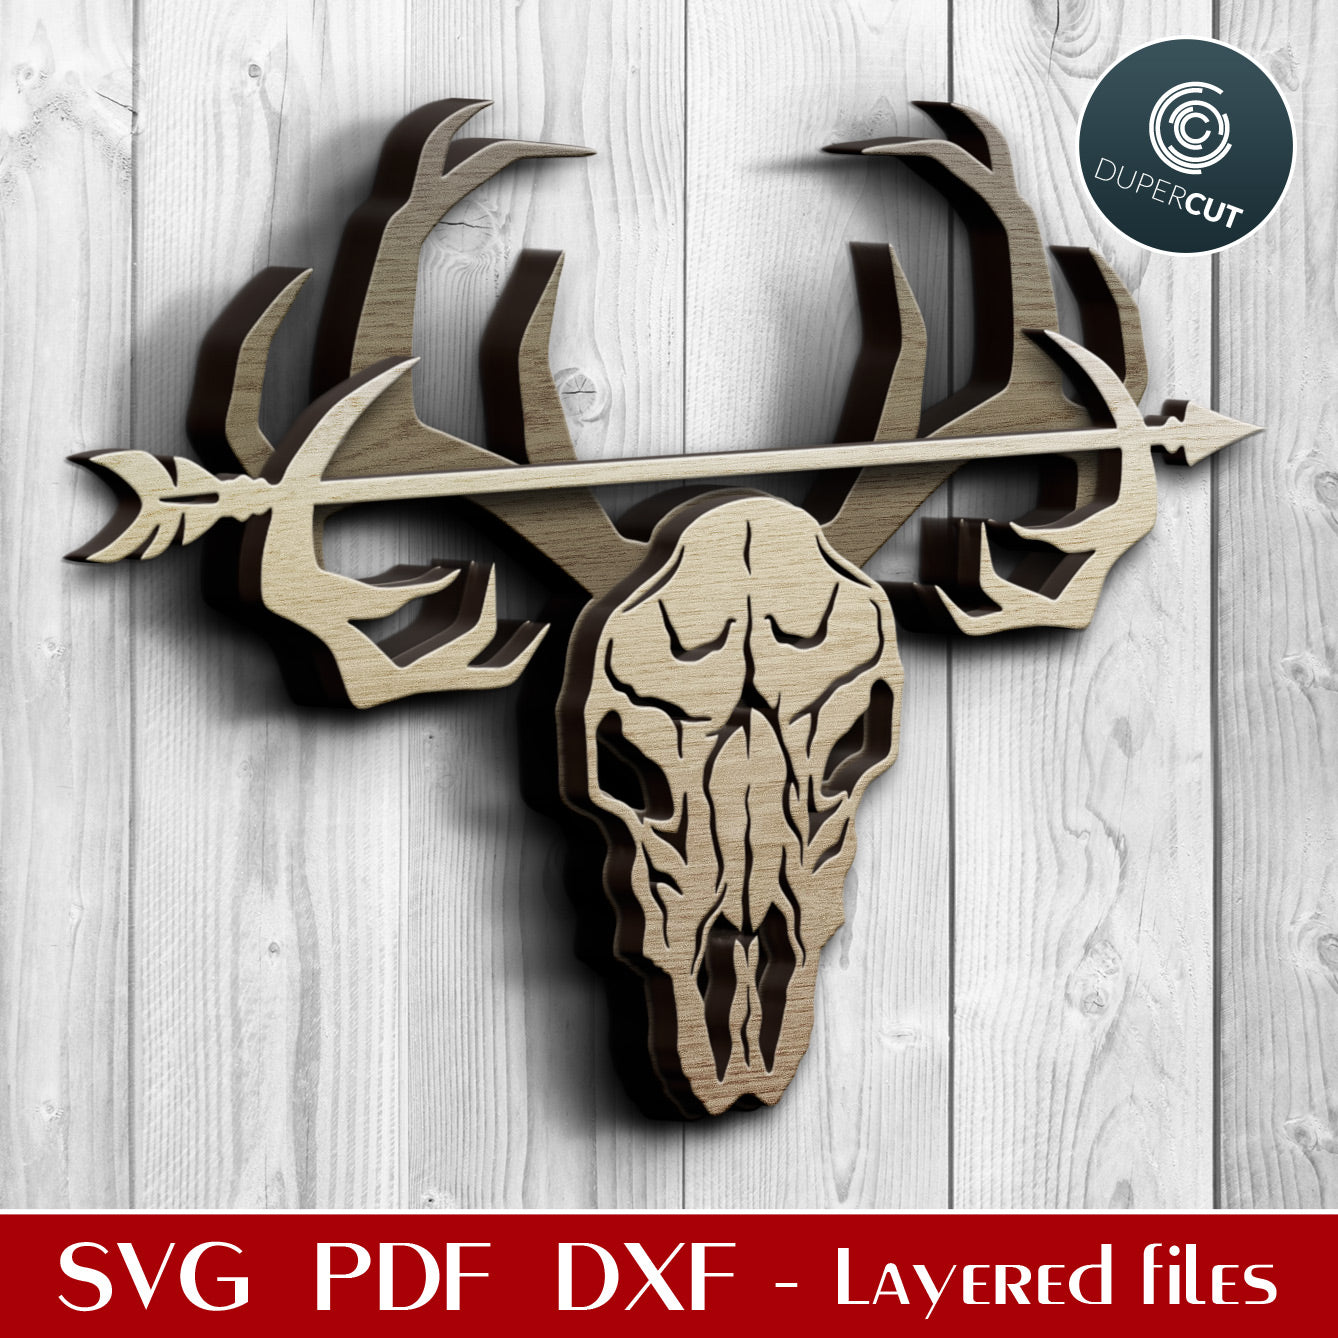 Hunting design Deer Skull layered cutting files SVG PDF DXF template for Glowforge, Cricut, Silhouette Cameo, CNC plasma machines